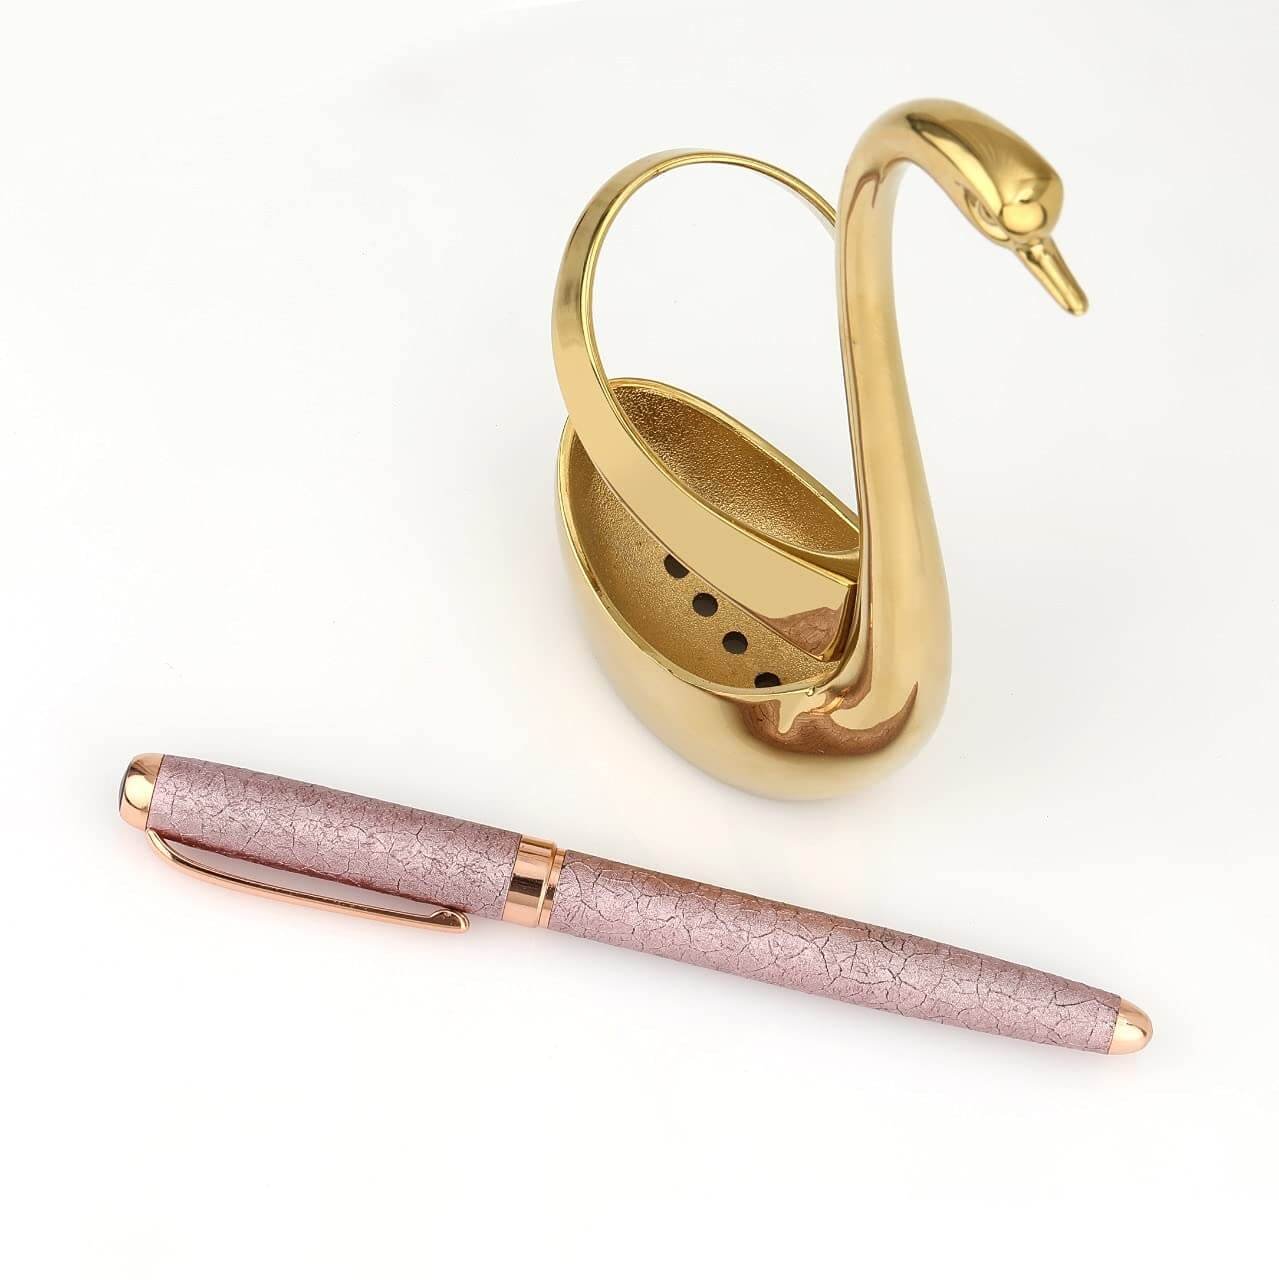 https://shoppingyatra.com/product_images/ROSTON Pen Stand with Pen, Holder Stand Office Desk Organizer Gold swan Corporate Gifts1.jpg